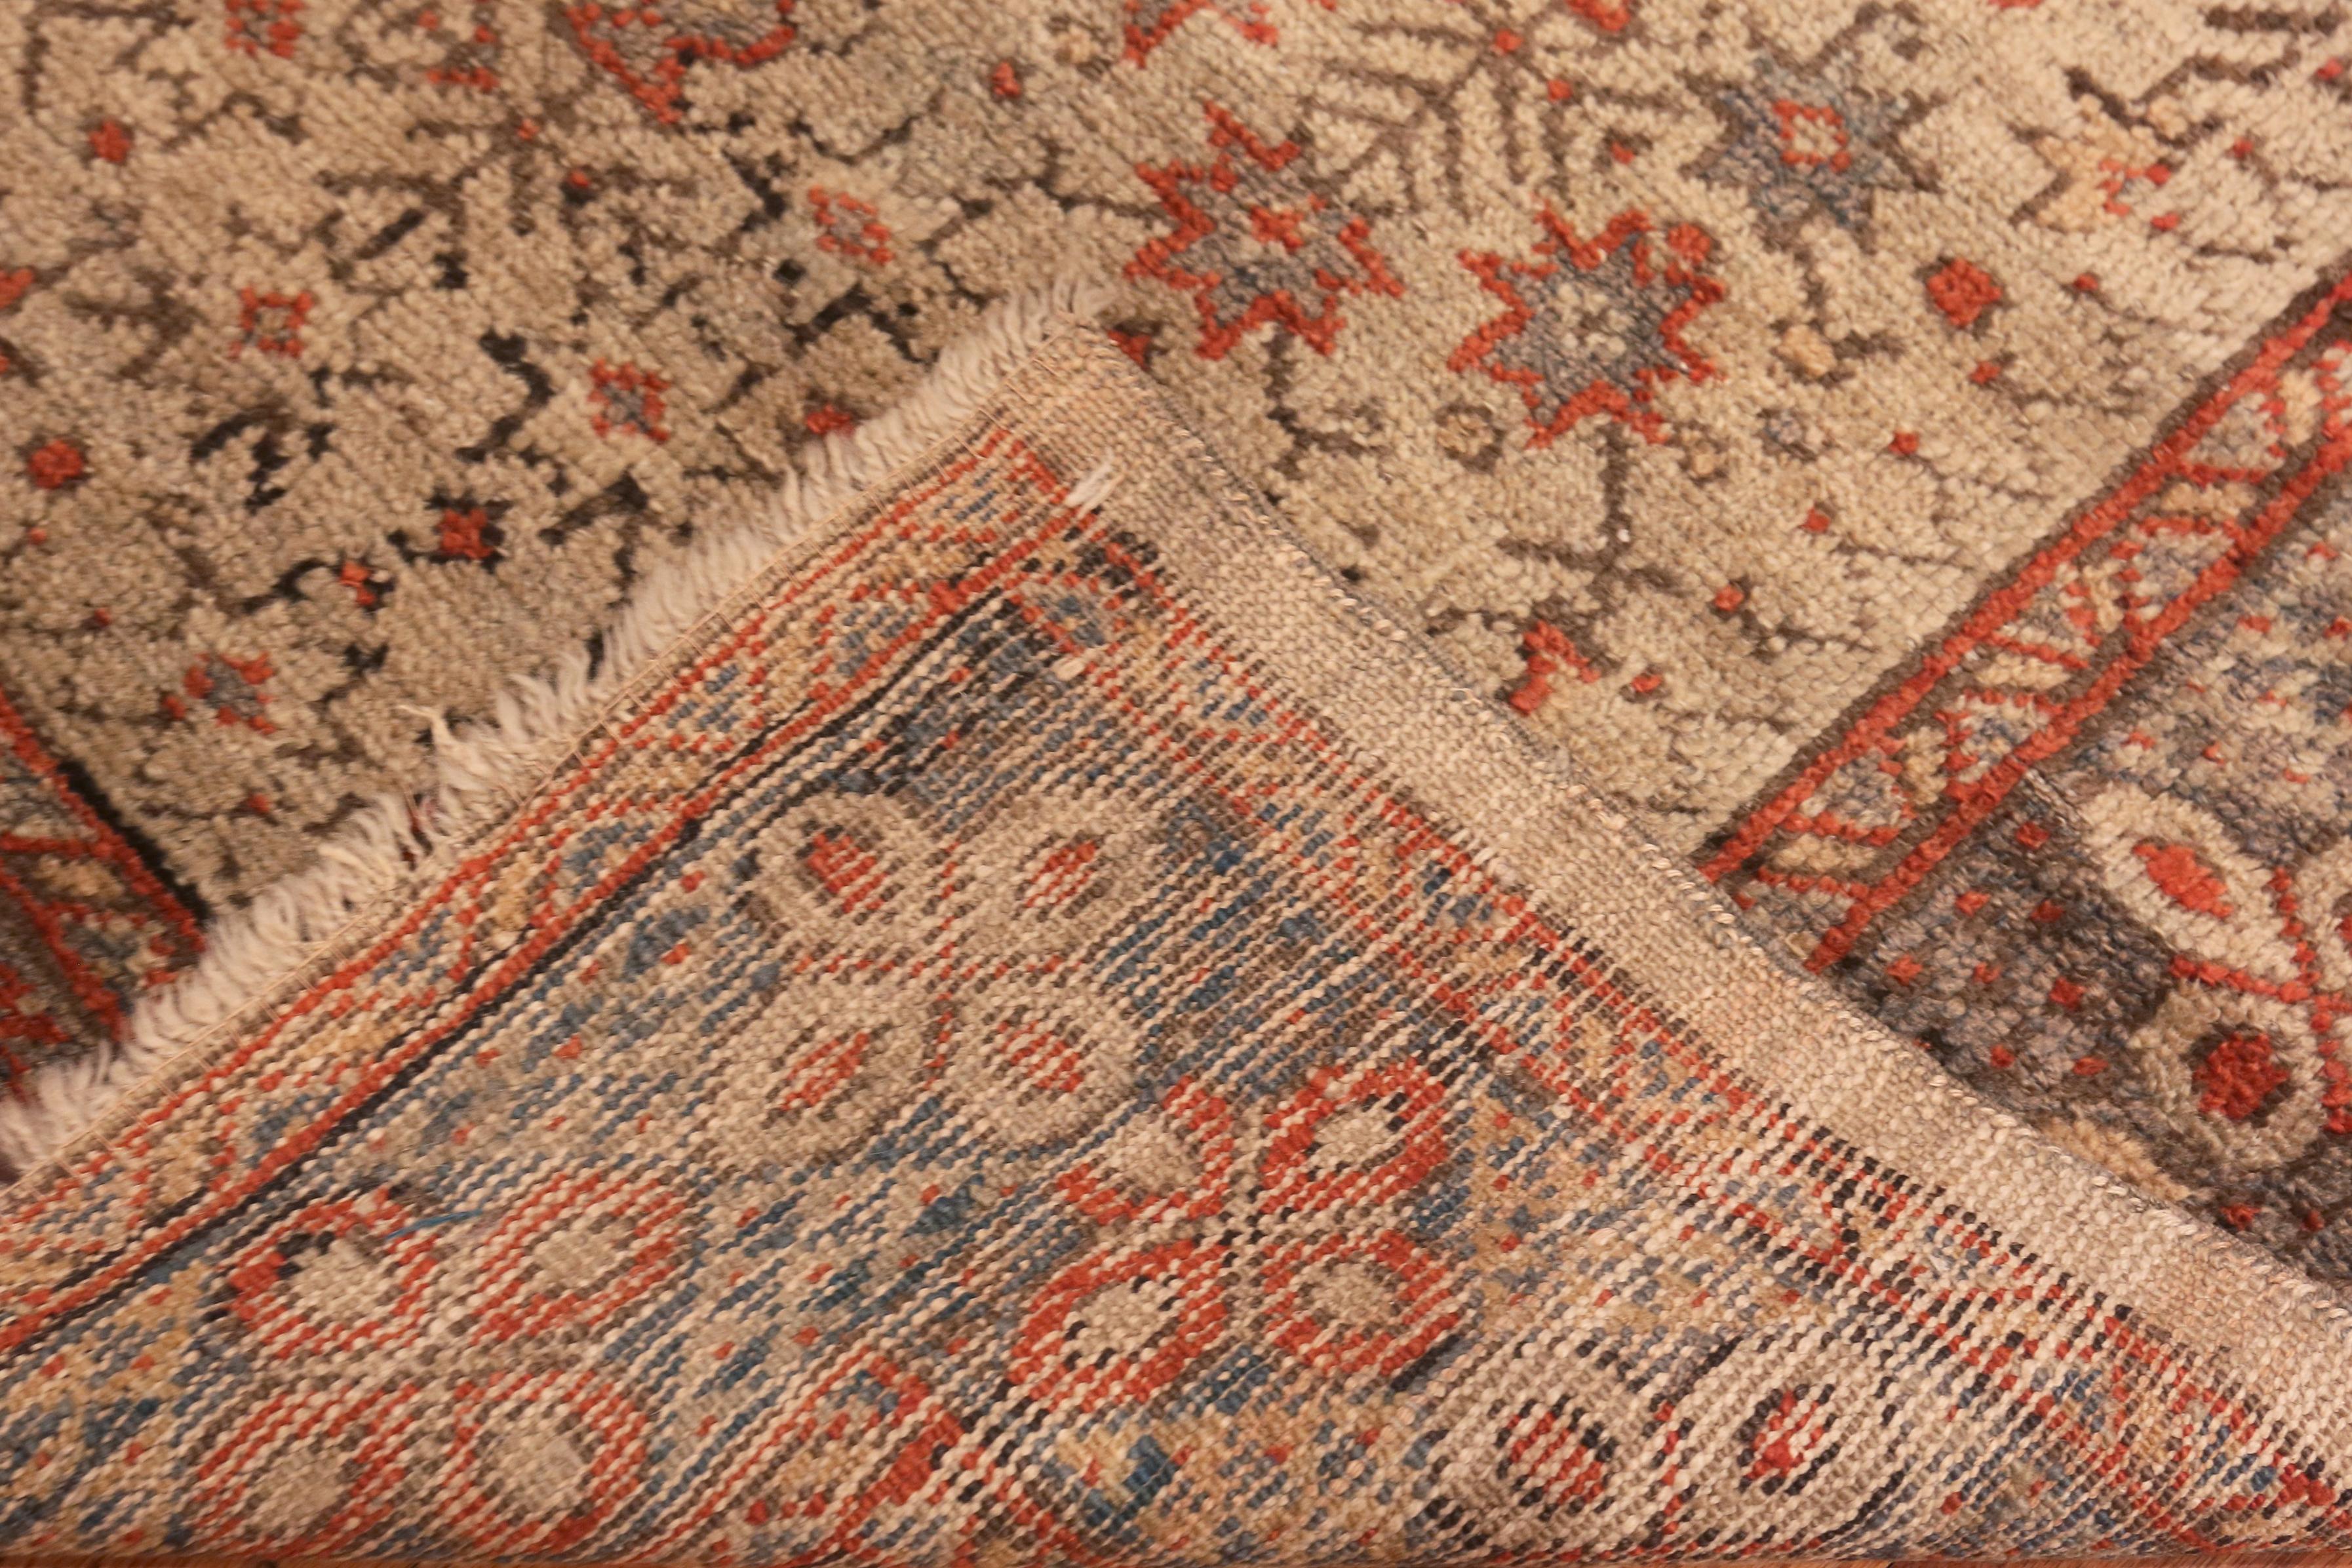 Gorgeous Square Tribal Antique Turkish Ghiordes Rug, Country Of Origin: Turkey, Circa Date: 1900. Size: 4 ft x 4 ft 2 in (1.22 m x 1.27 m)